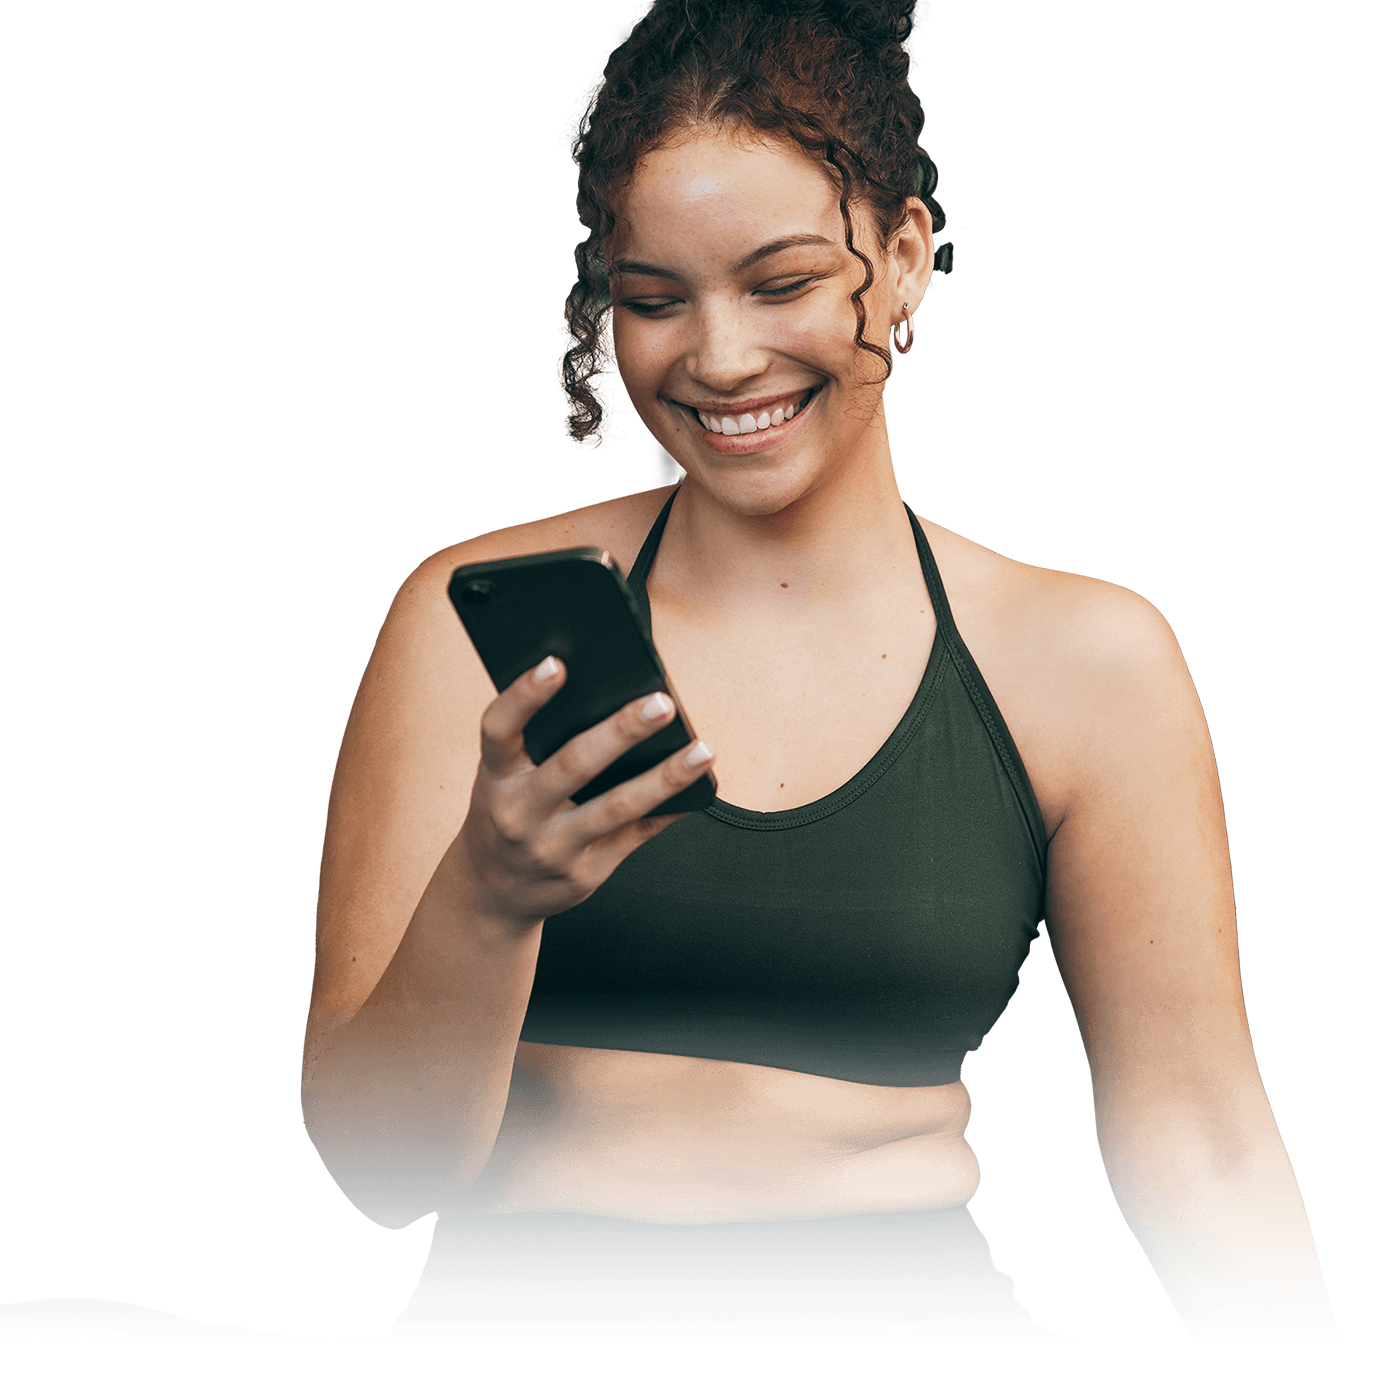 A woman smiling and looking at her phone in her hands.